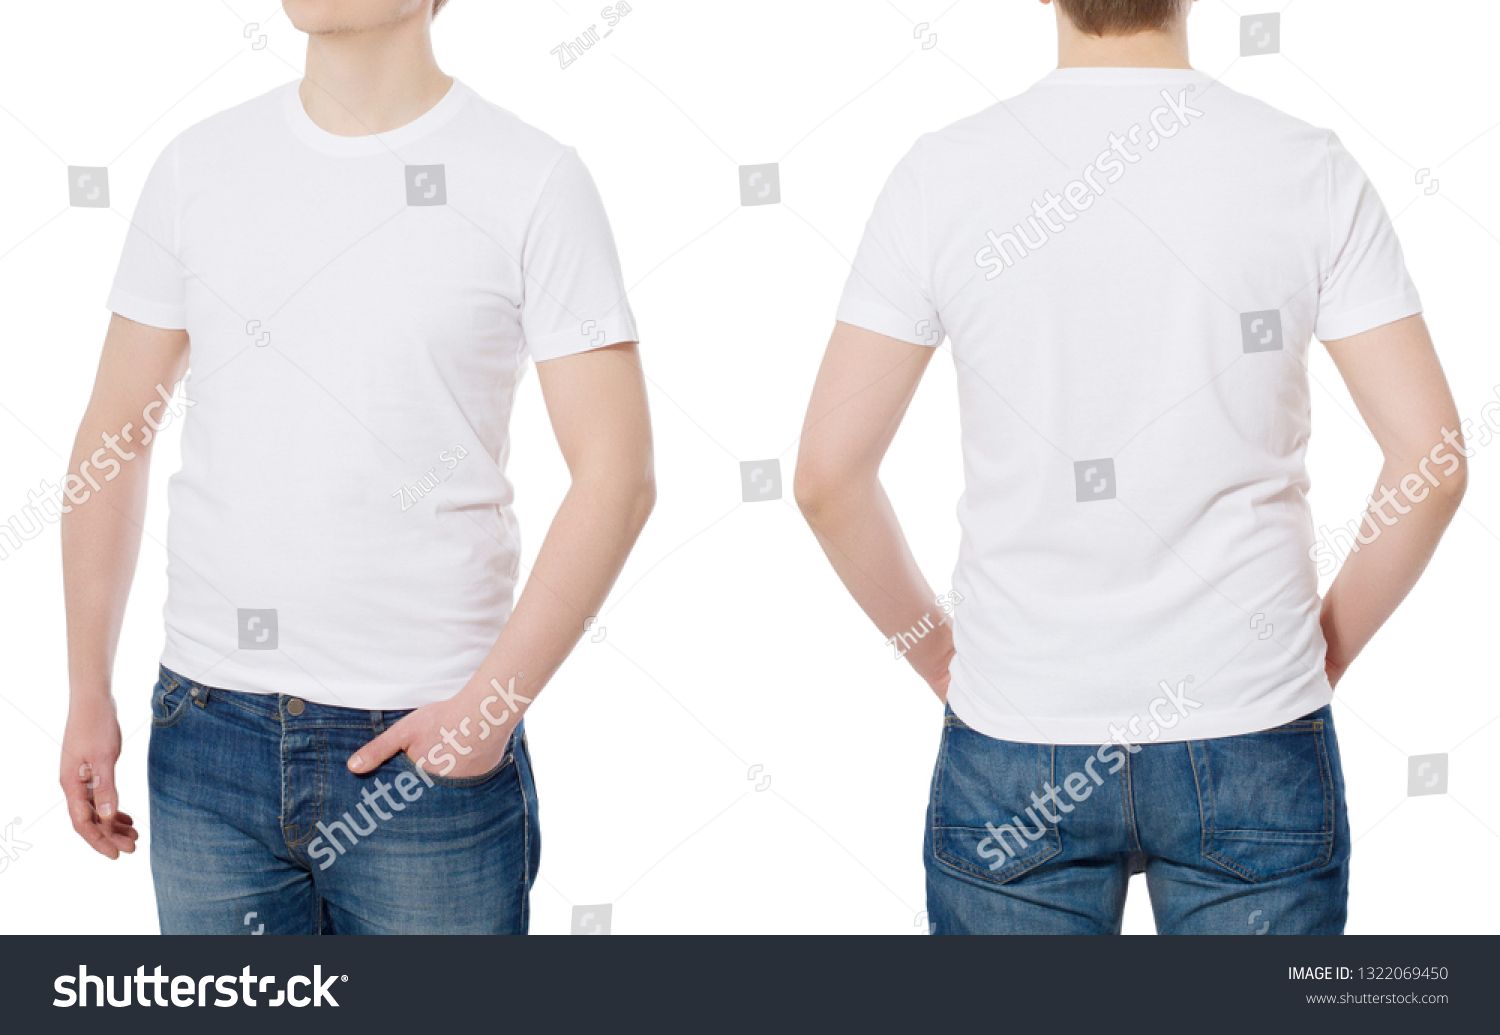 Tshirt Template Blank T Shirt Front Stock Photo (Edit Now) 1322069450